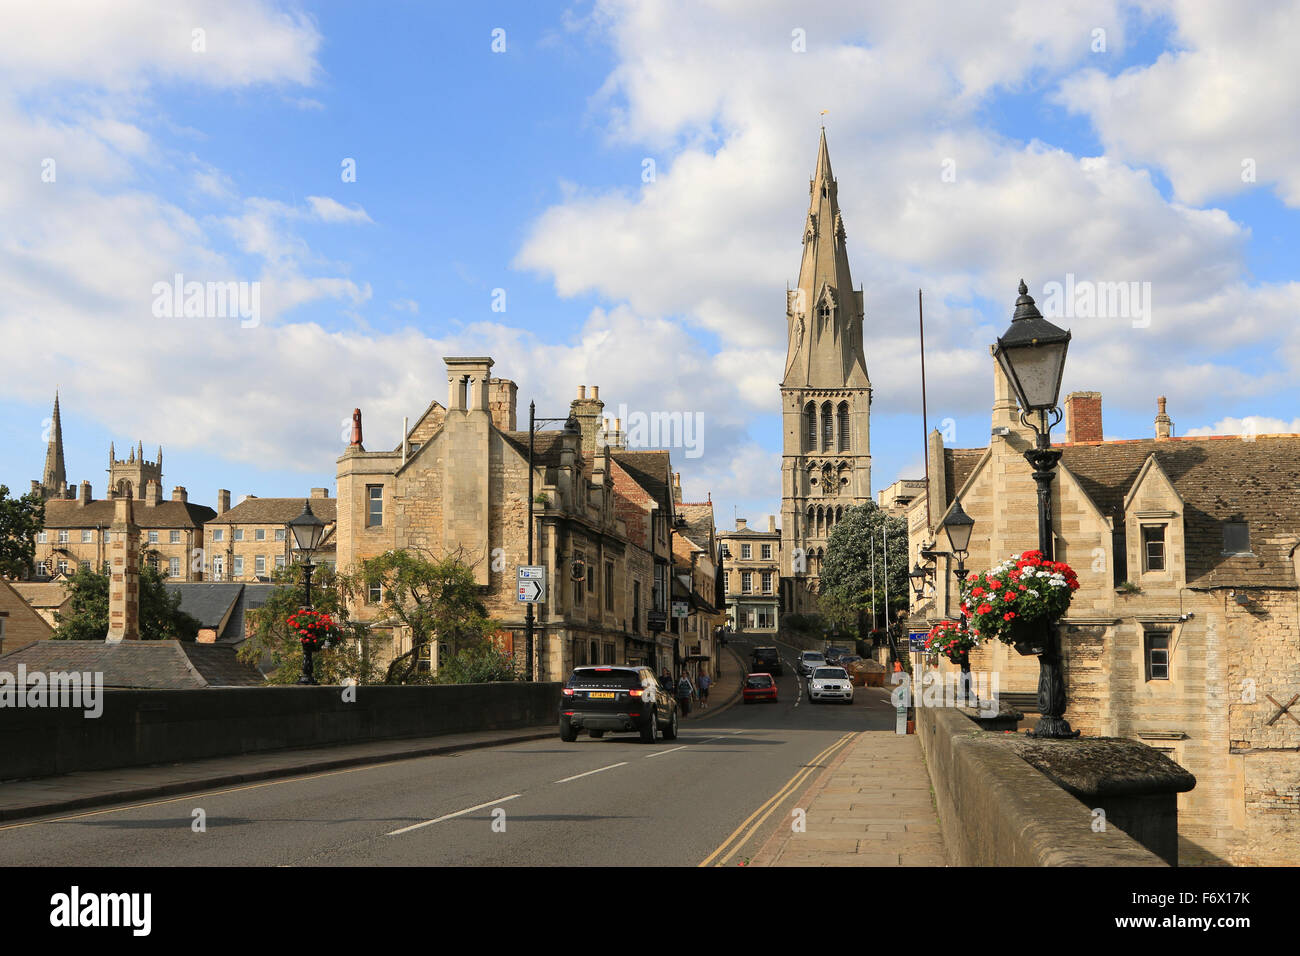 Bridge over the River Welland and St Mary's Hill, Stamford, Lincolnshire, England, UK Stock Photo